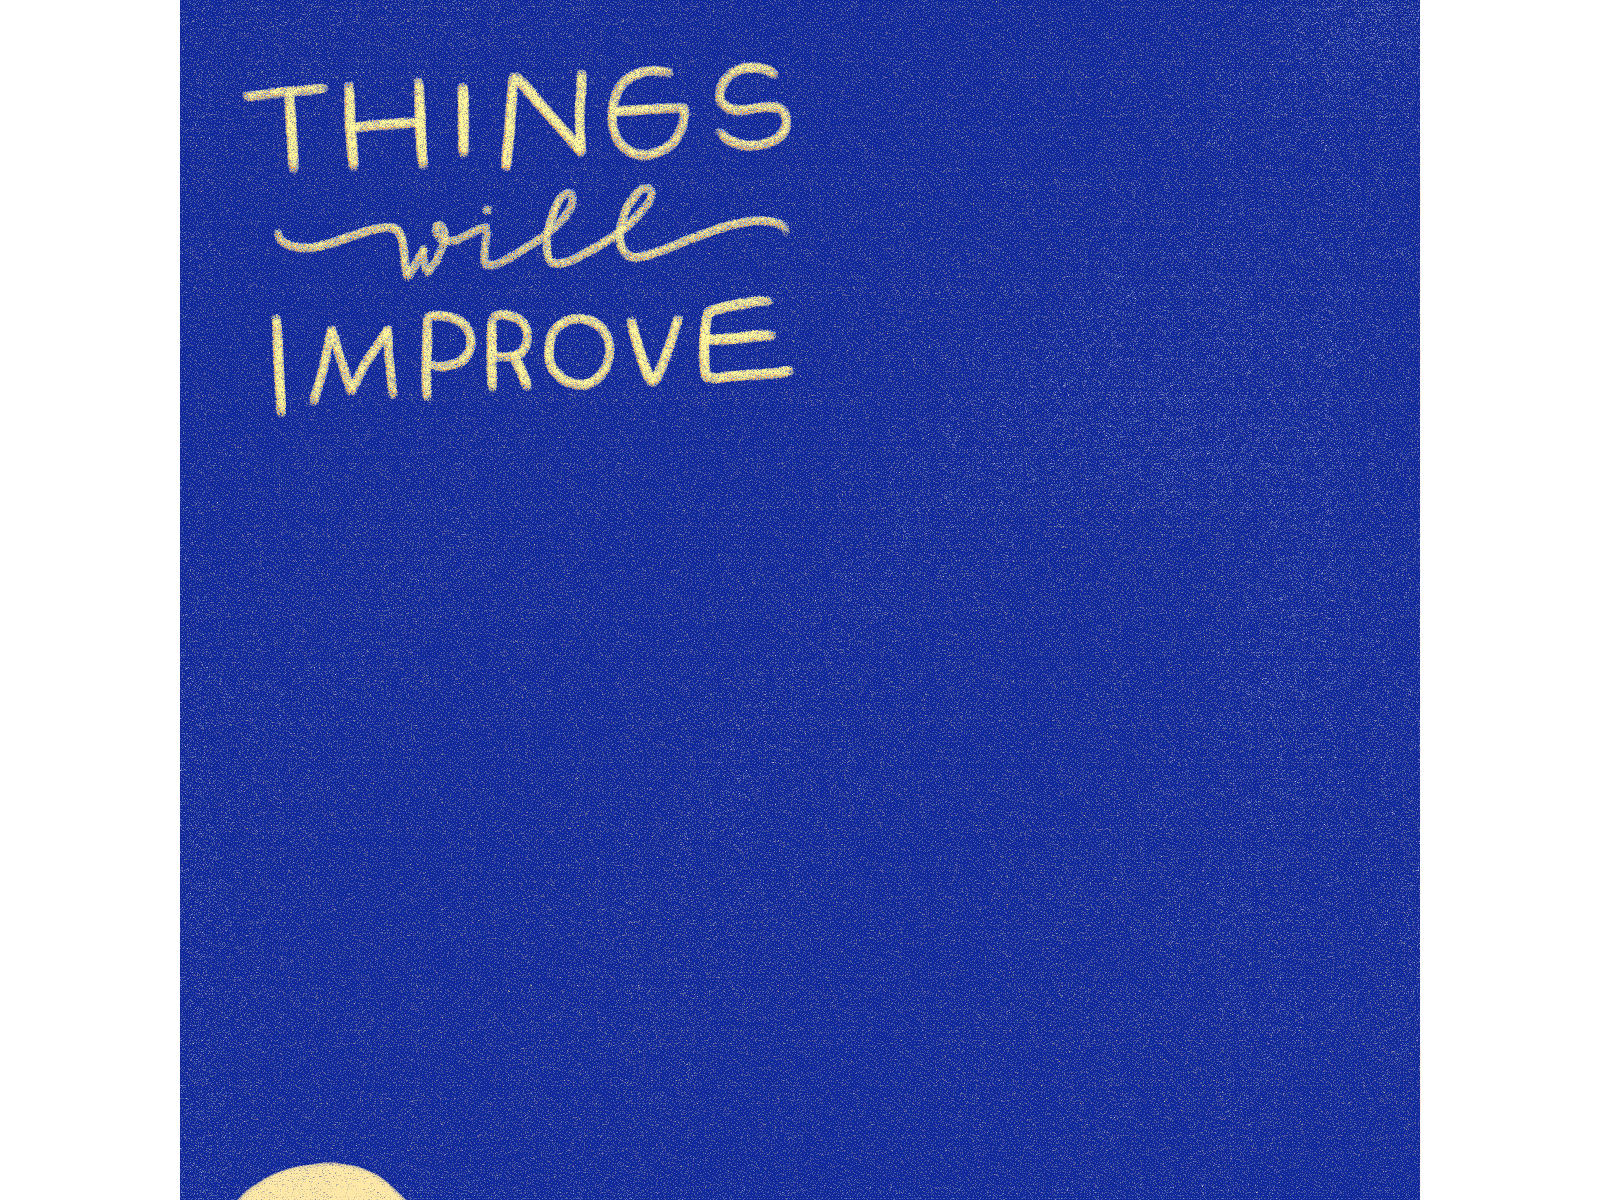 Things will improve animation calligraphy digital illustration illustration lettering animation quote design typography animation typography art